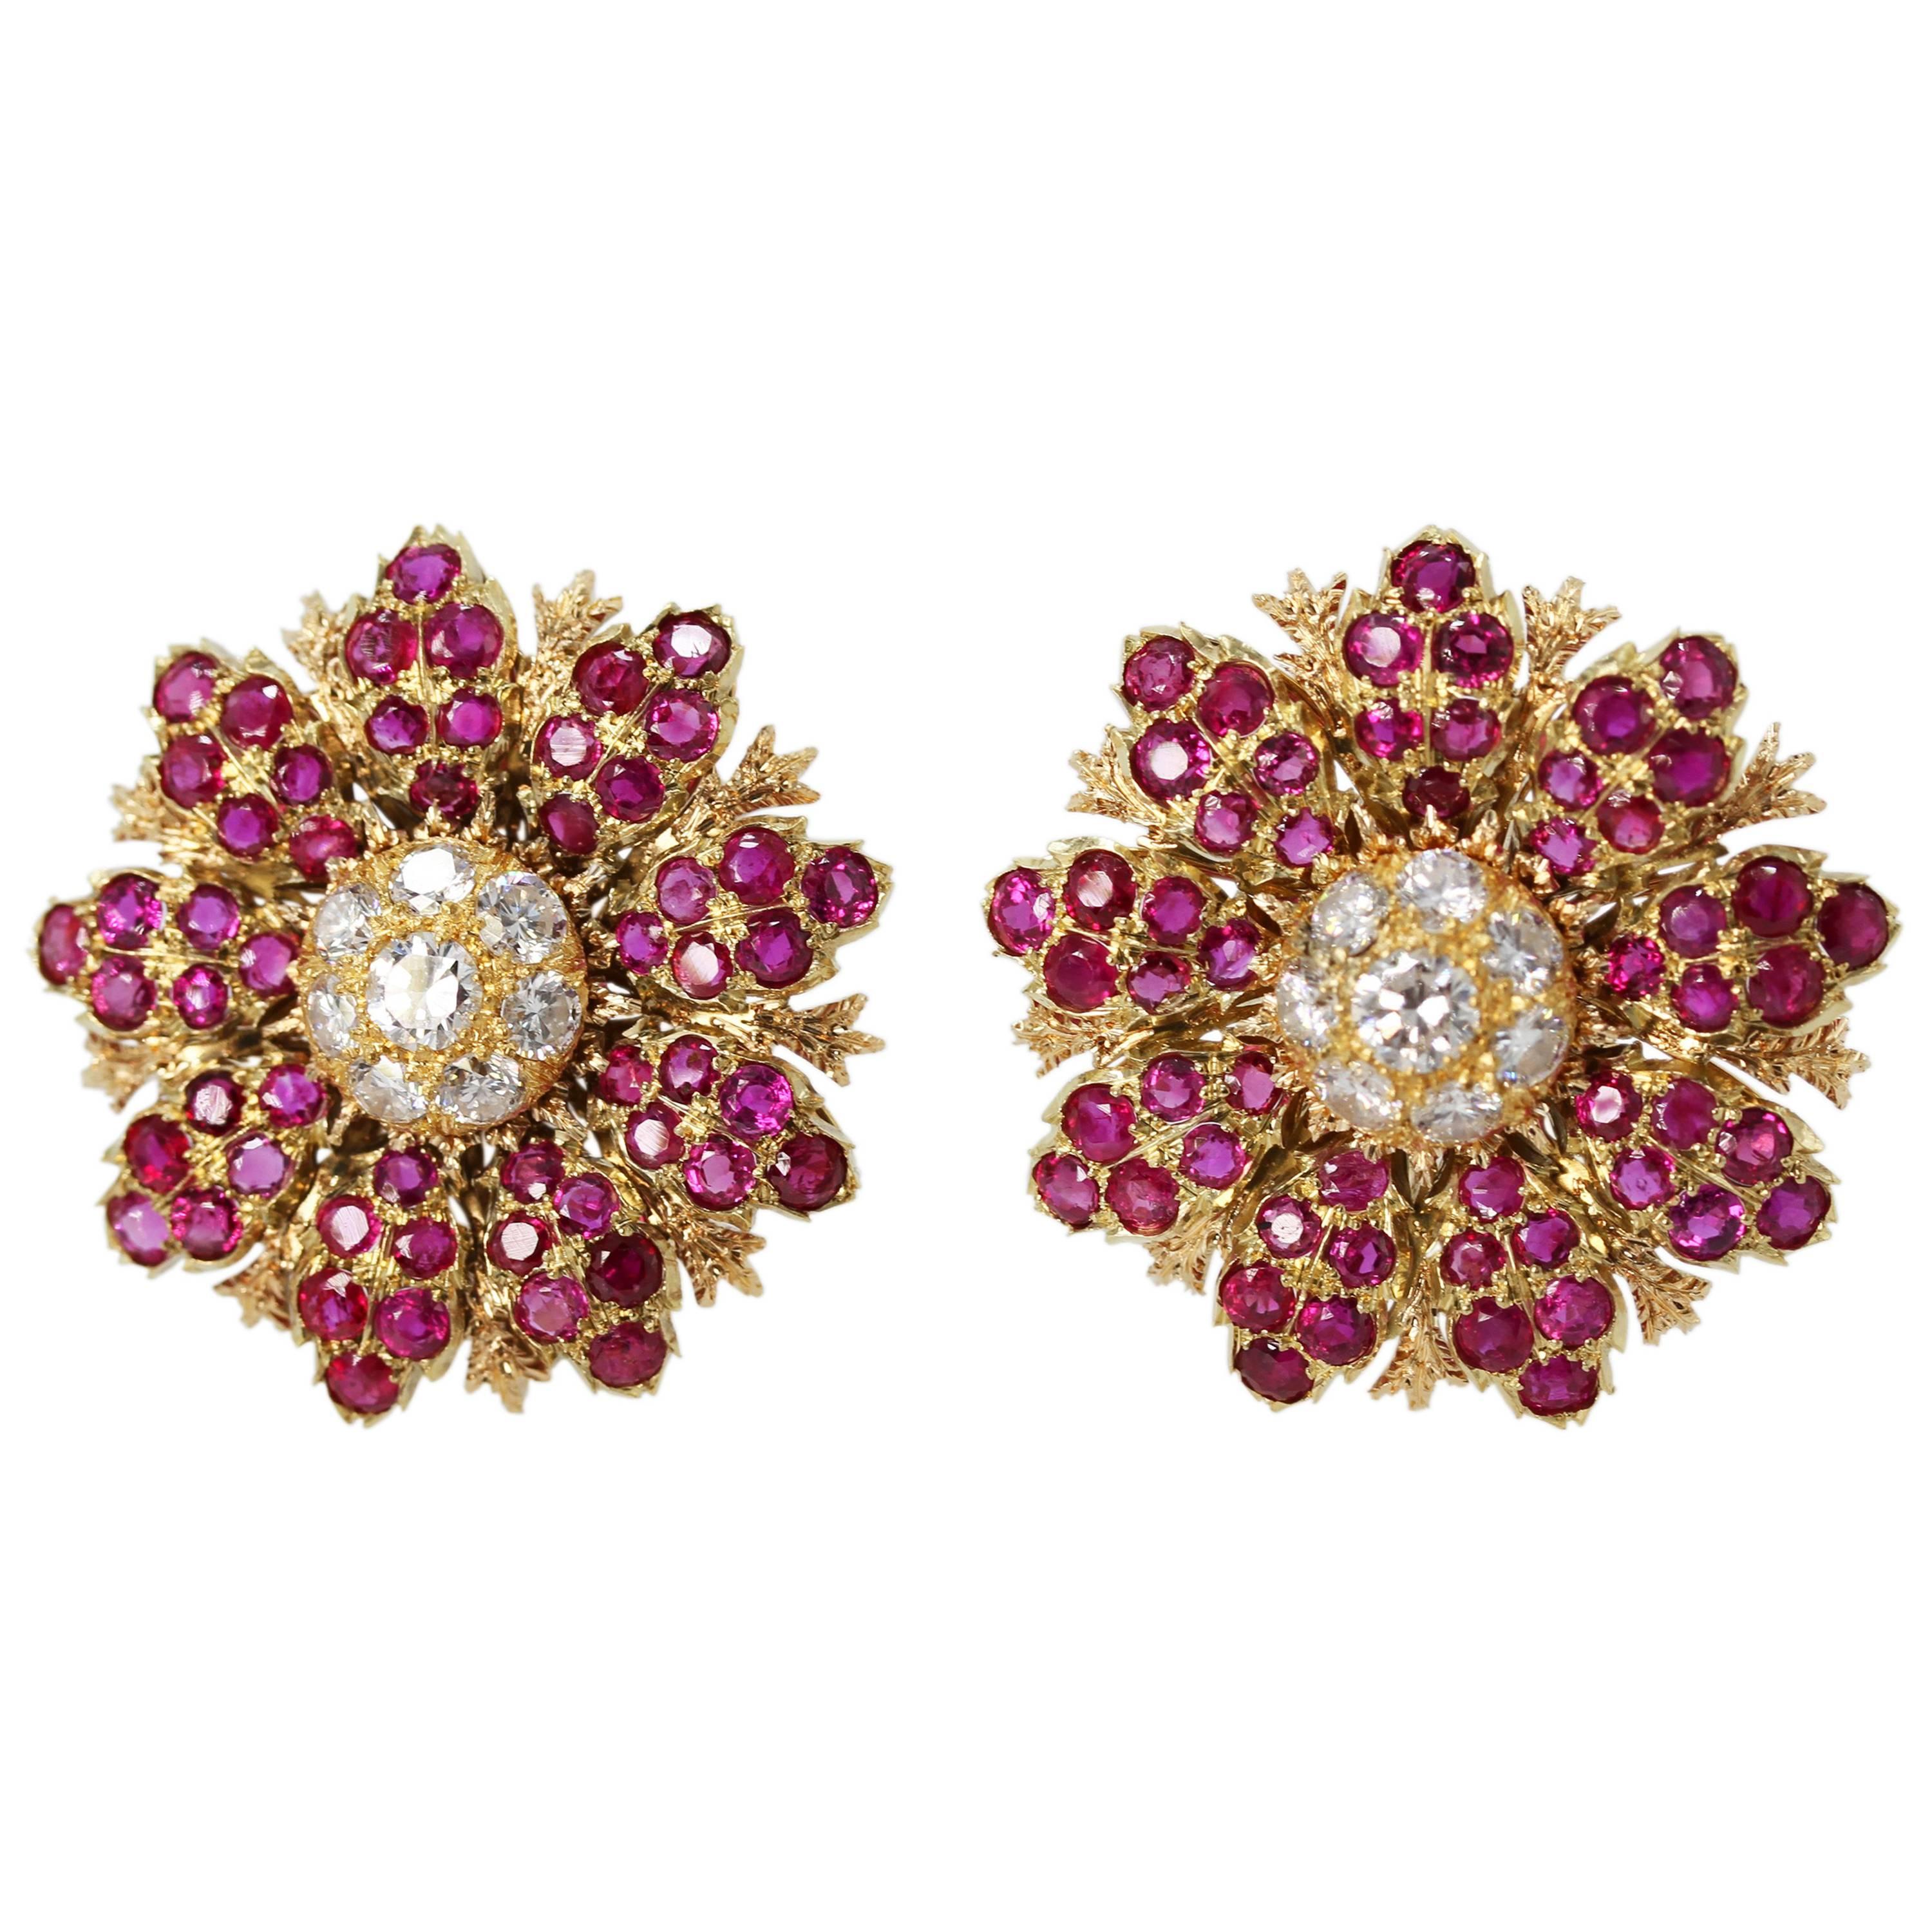 1940s Buccellati Ruby, Diamond and Gold Flower Earclips